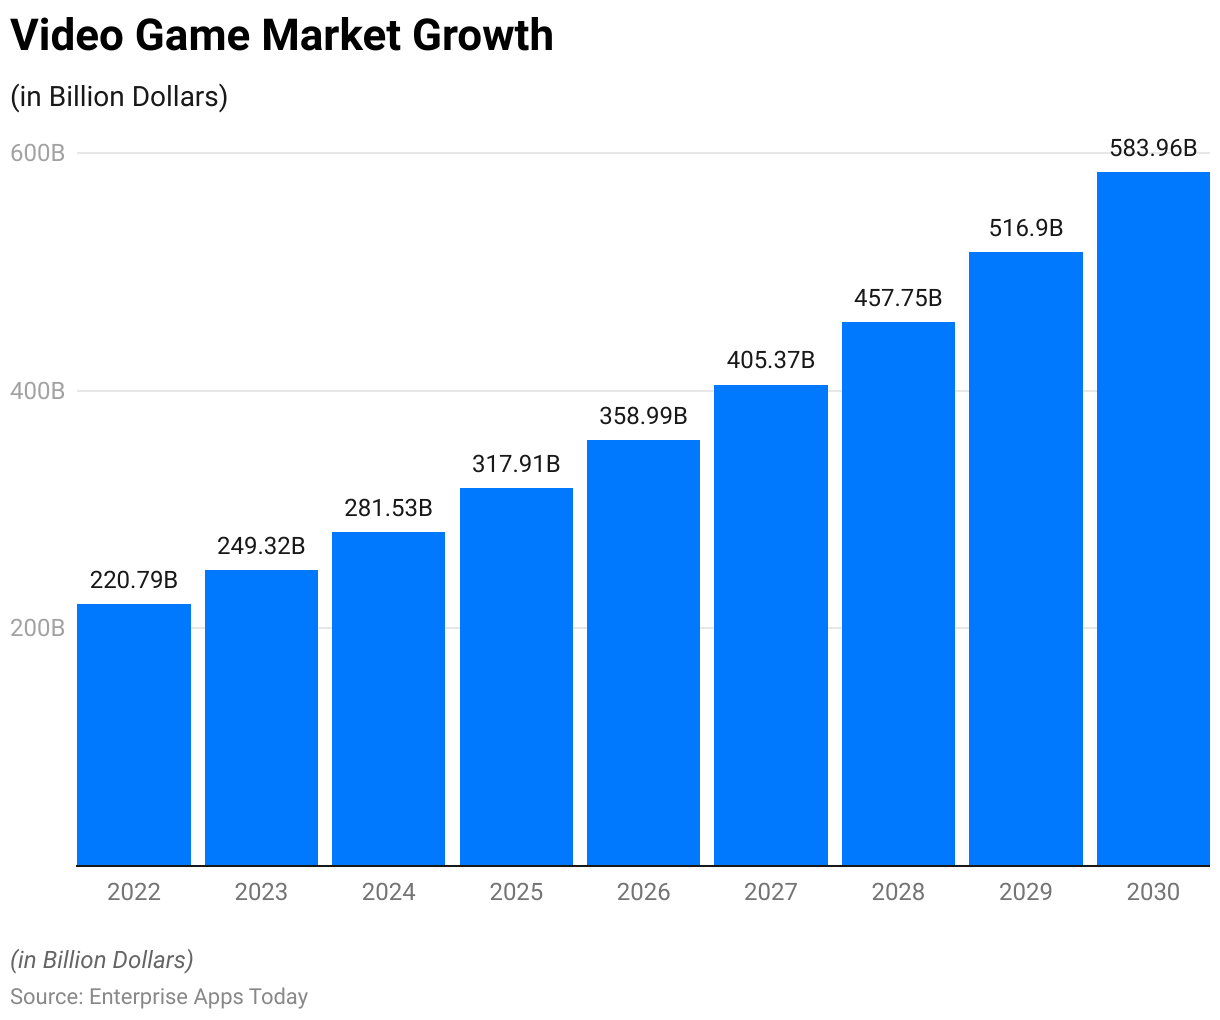 Video Game Market Growth 